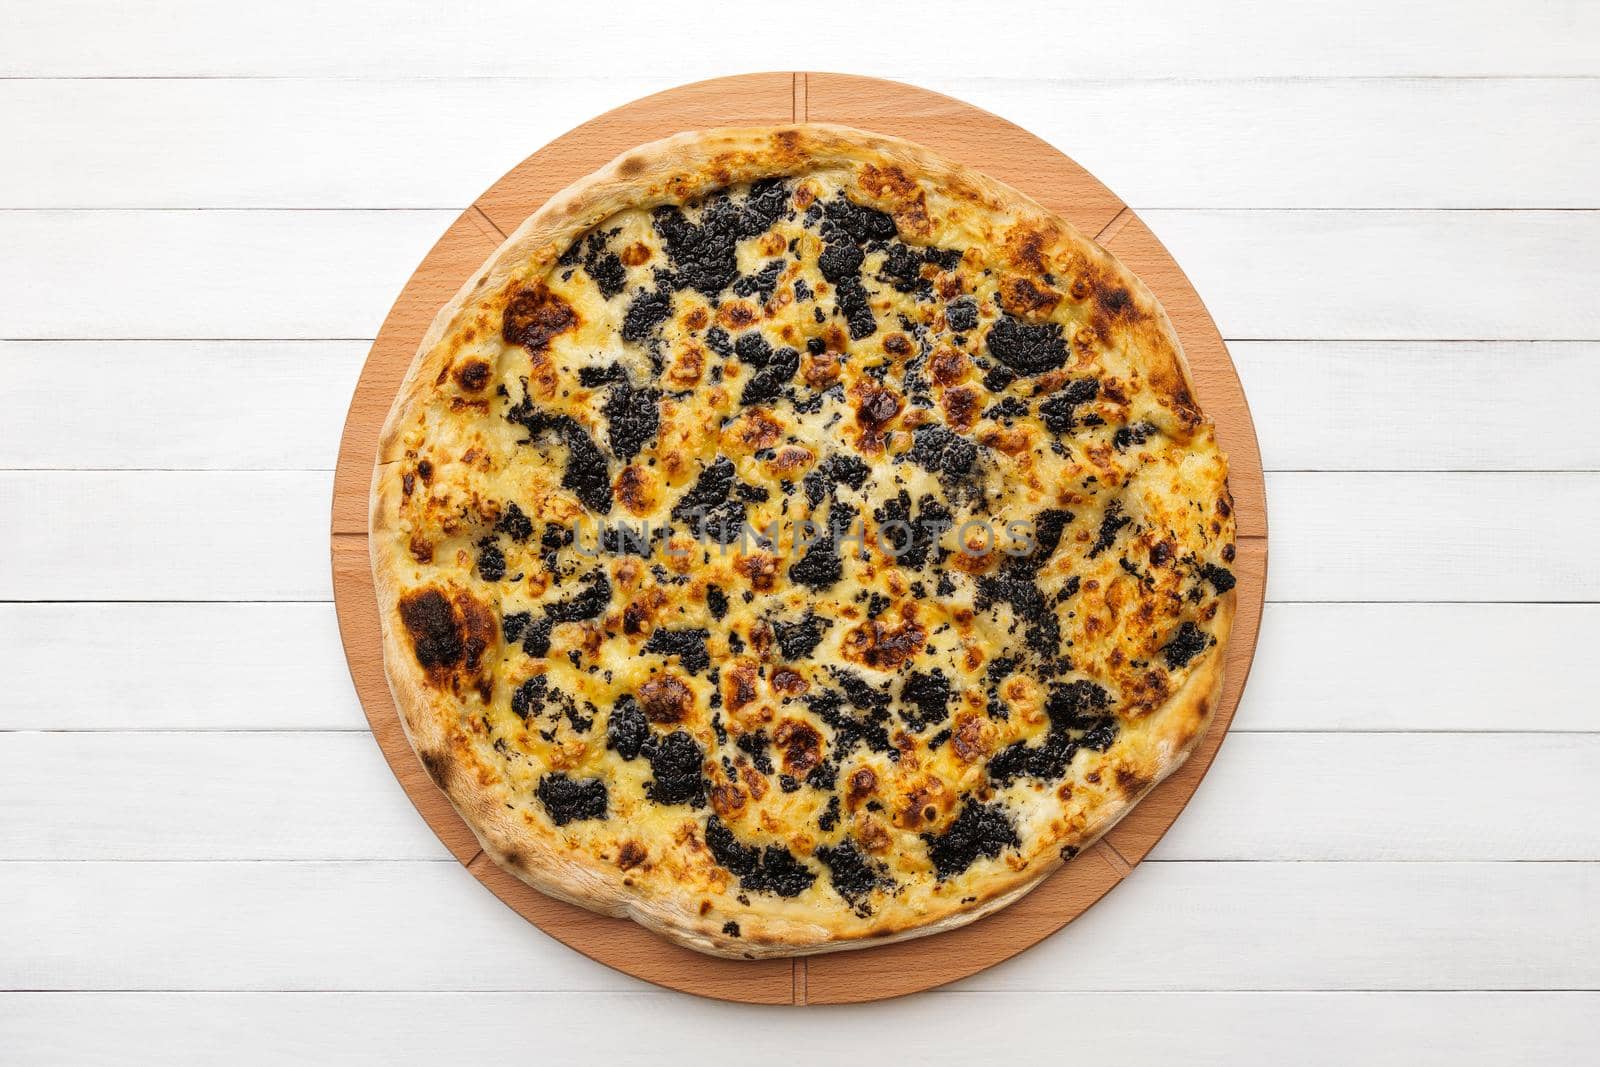 Whole round pizza topped with truffles and cheese on wooden plate. Top view on white board background by apavlin